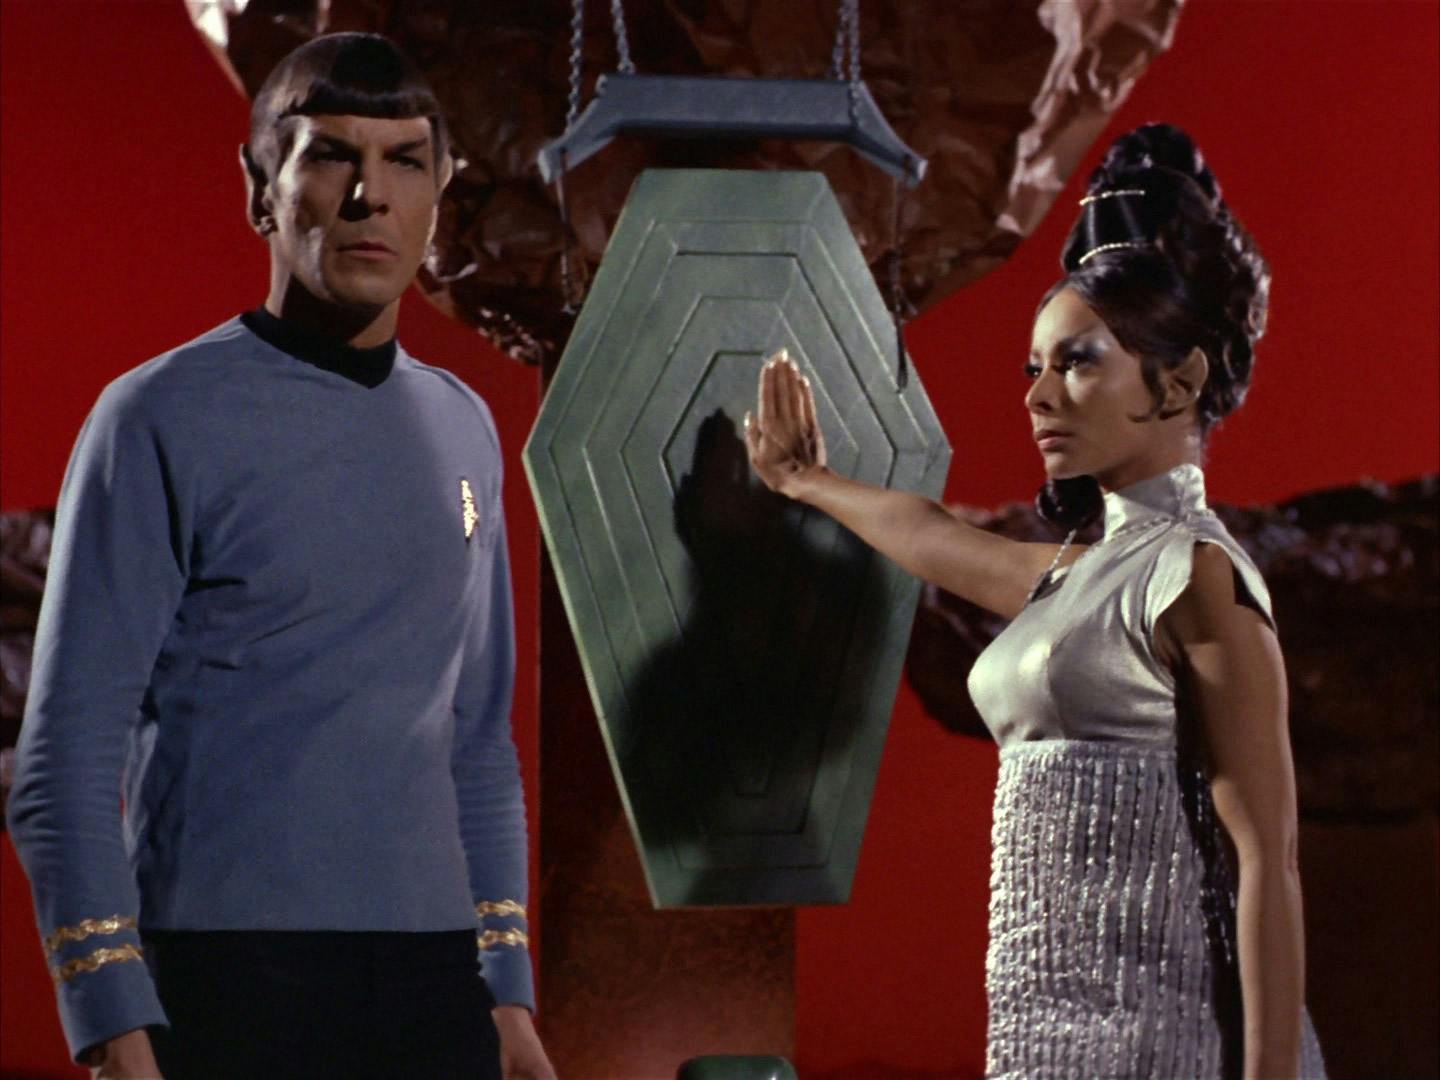 As Spock is set to perform the Vulcan marriage ritual, the koon-ut-kal-if-fee; T'Pring stops him, rejecting him, and invokes the kal-if-fee and choosing Kirk as her champion in 'Amok Time'